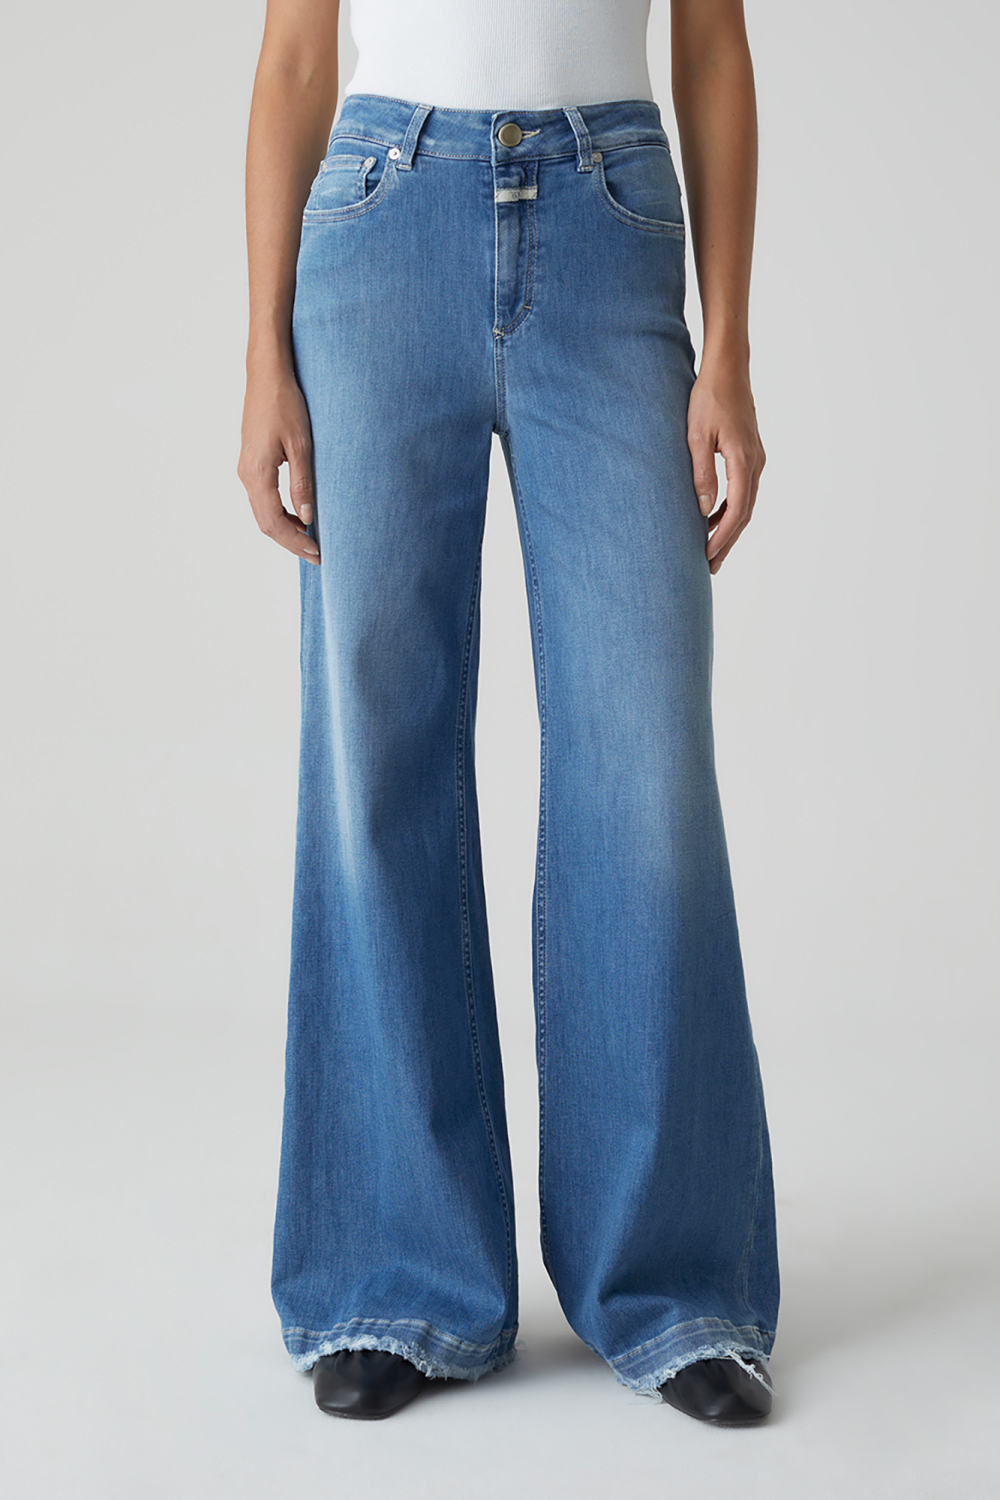 Look your best in Glow-Up from Closed. This high-waisted style is made of Italian comfort stretch denim in a wide fit.